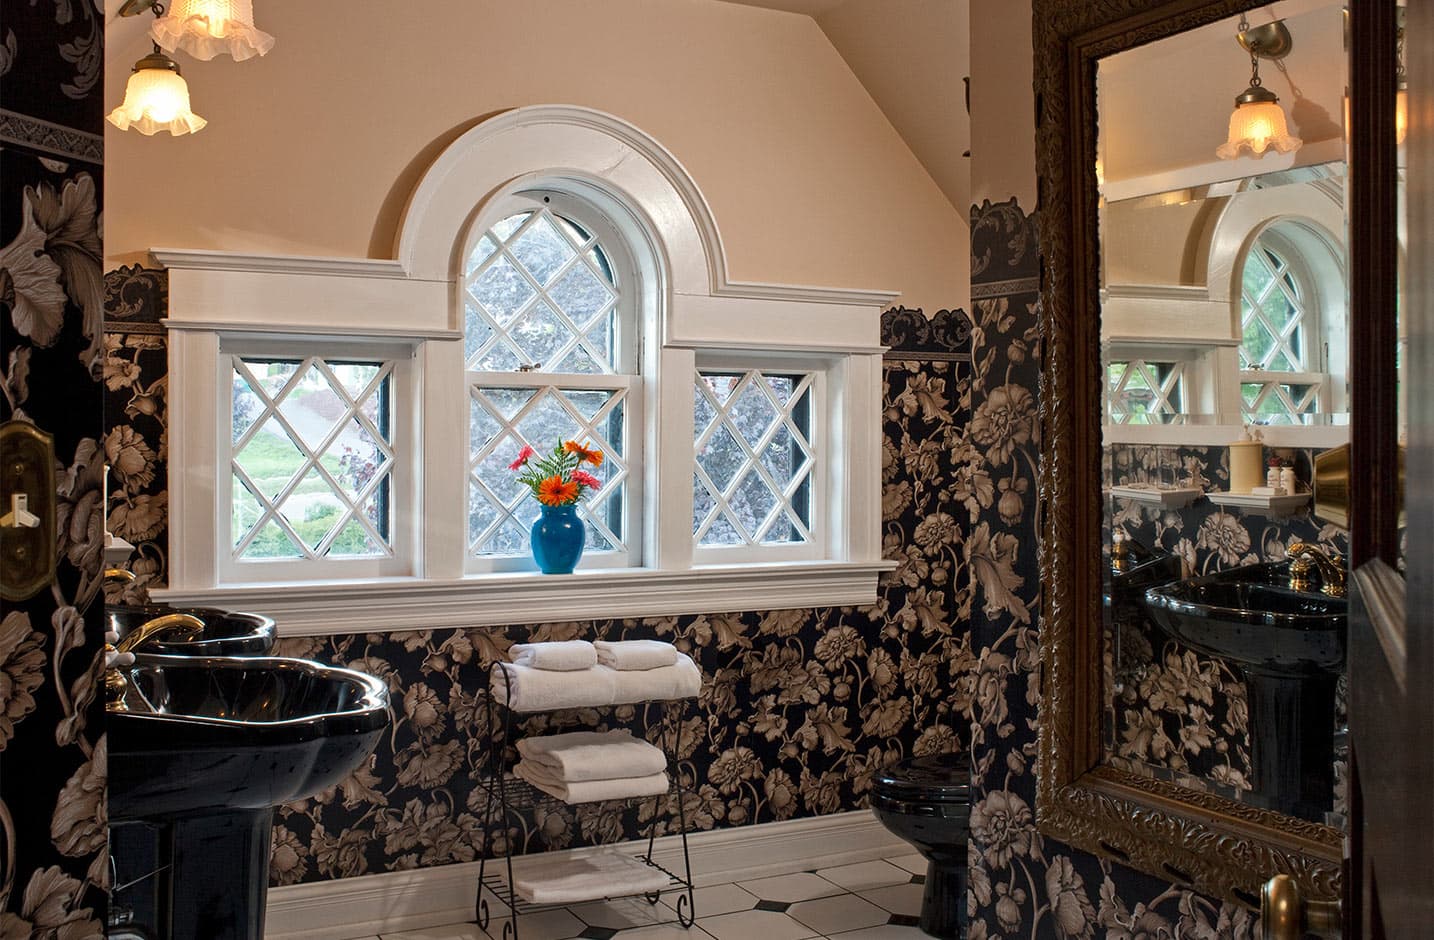 Bathroom in south room with black fixtures